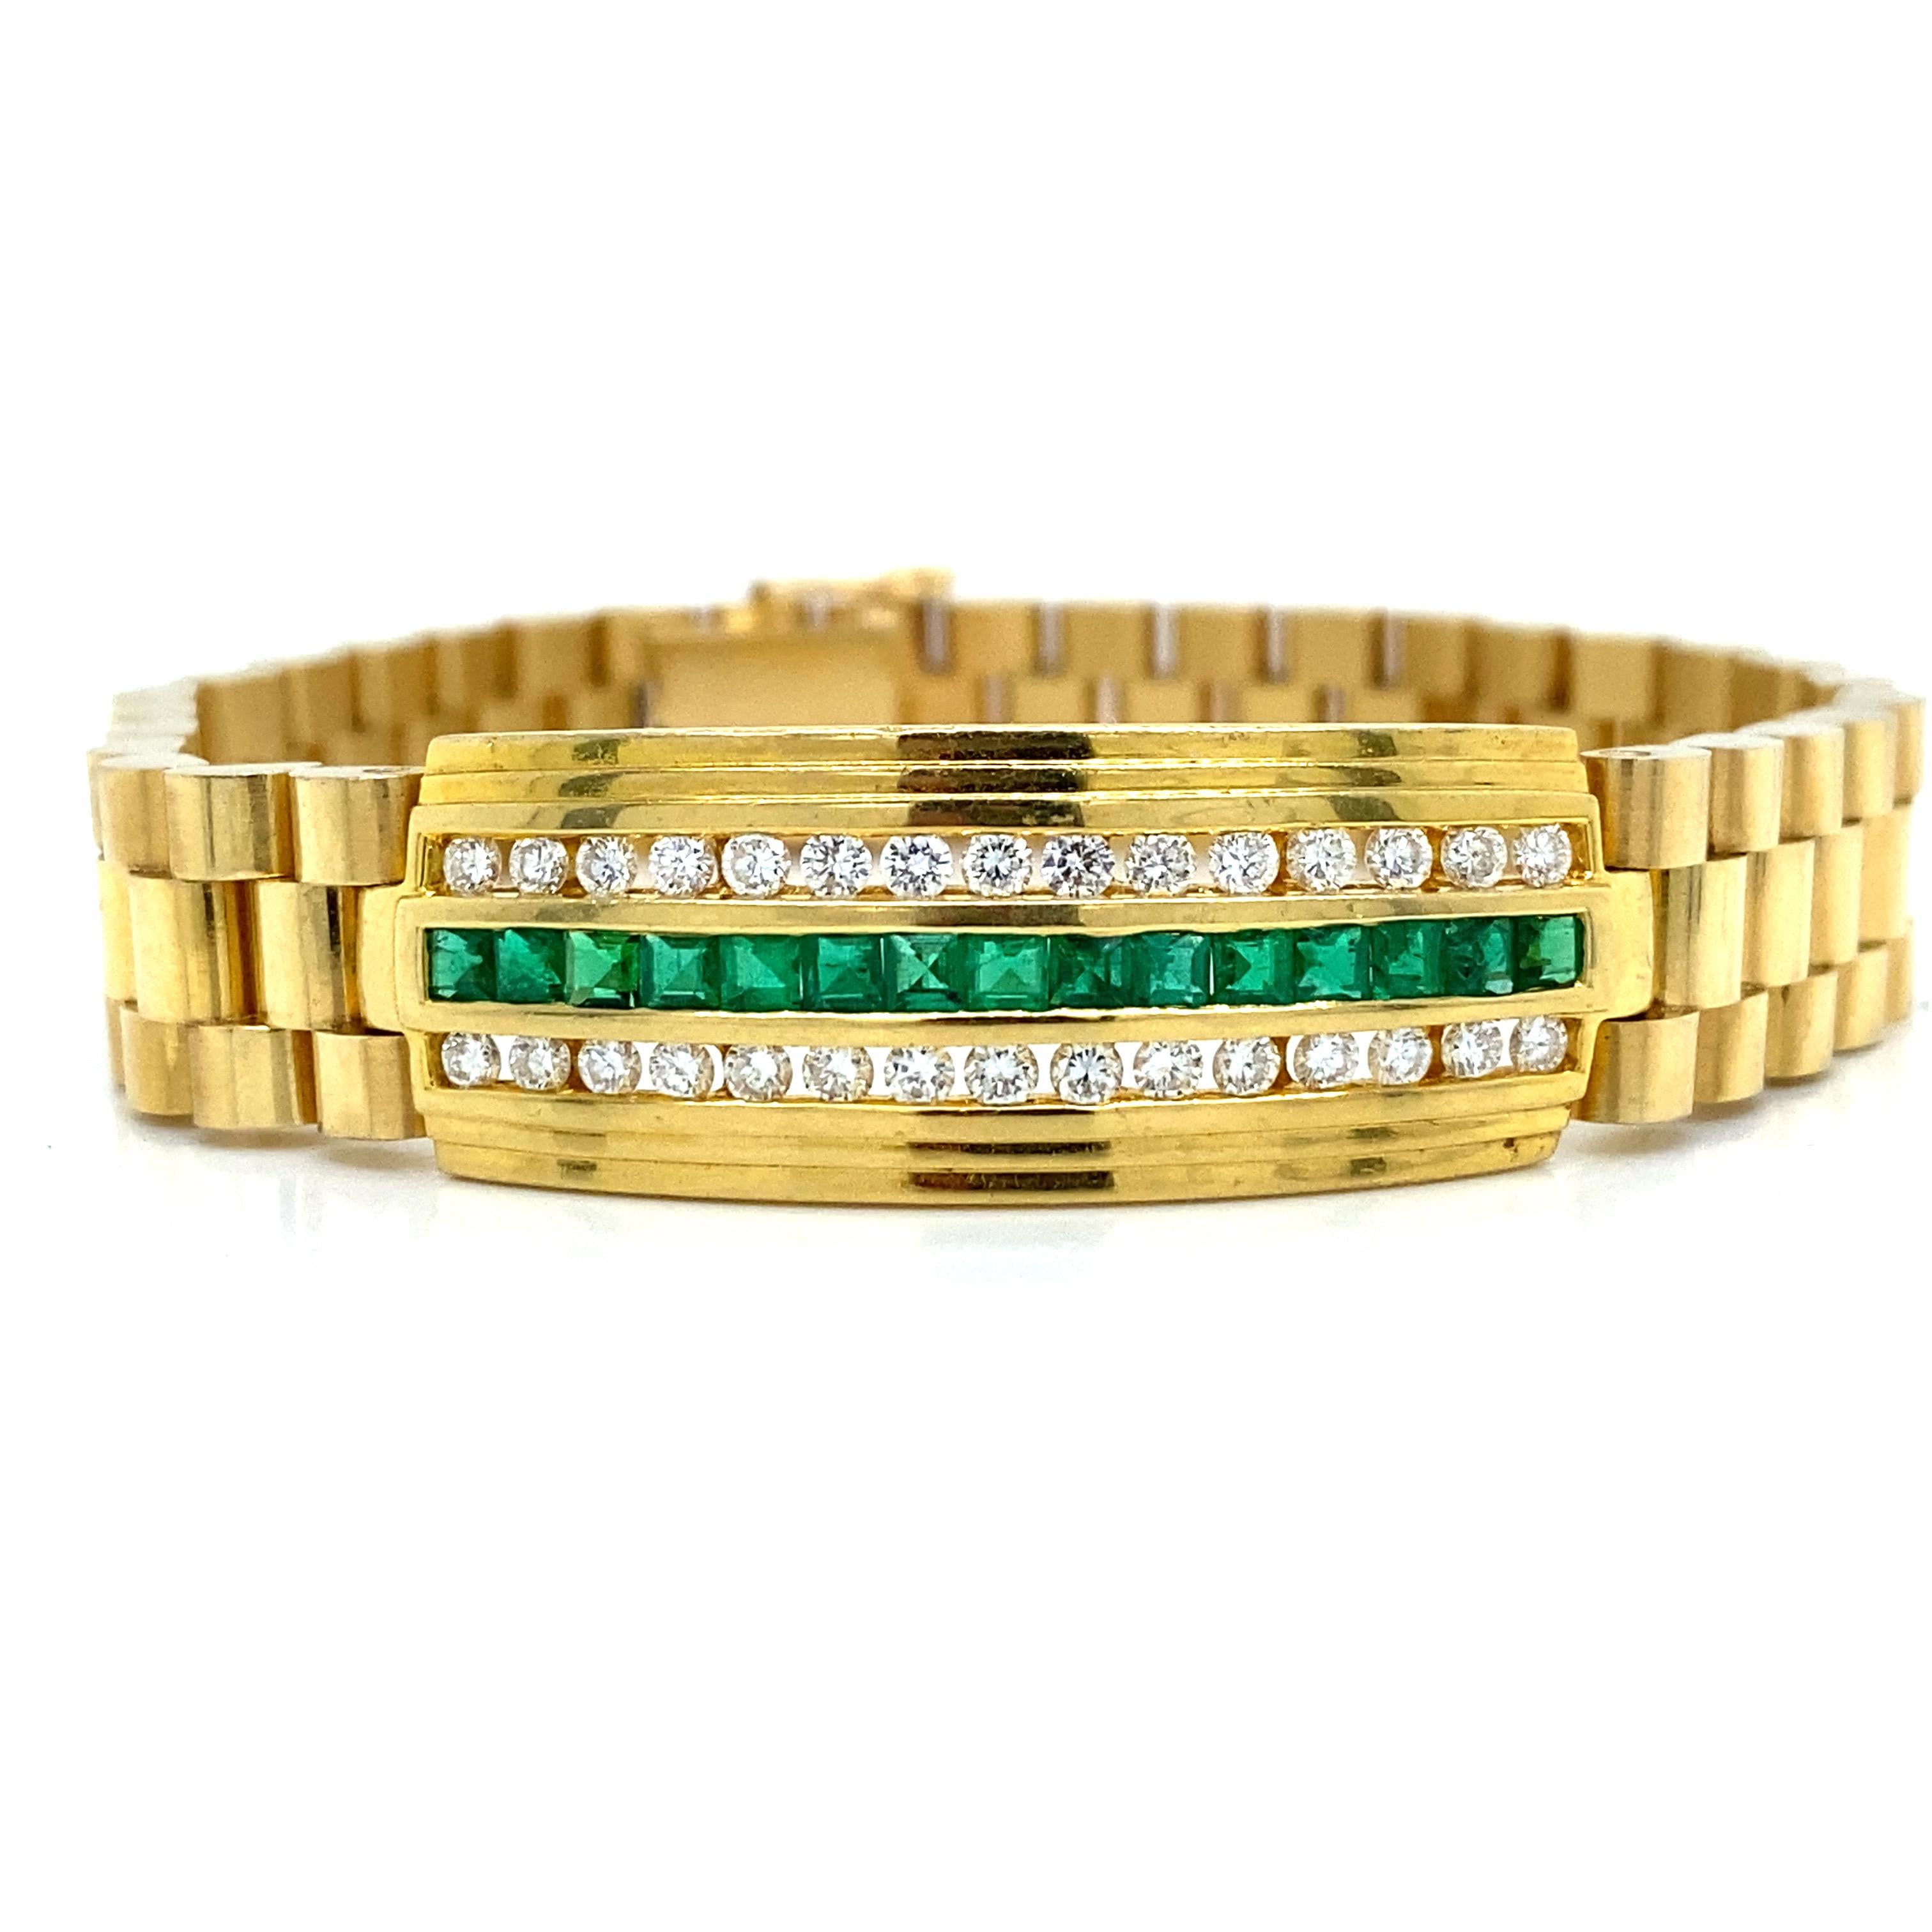 Diamond Emerald Bracelet in 18K Yellow Gold.  (15) Emerald Gemstones weighing 1.05 carats and (30) Round Brilliant Cut Diamonds weighing 1.50 carat total weight, G-H in color and VS in clarity are expertly set.  The Bracelet measures 7 1/2 inch in